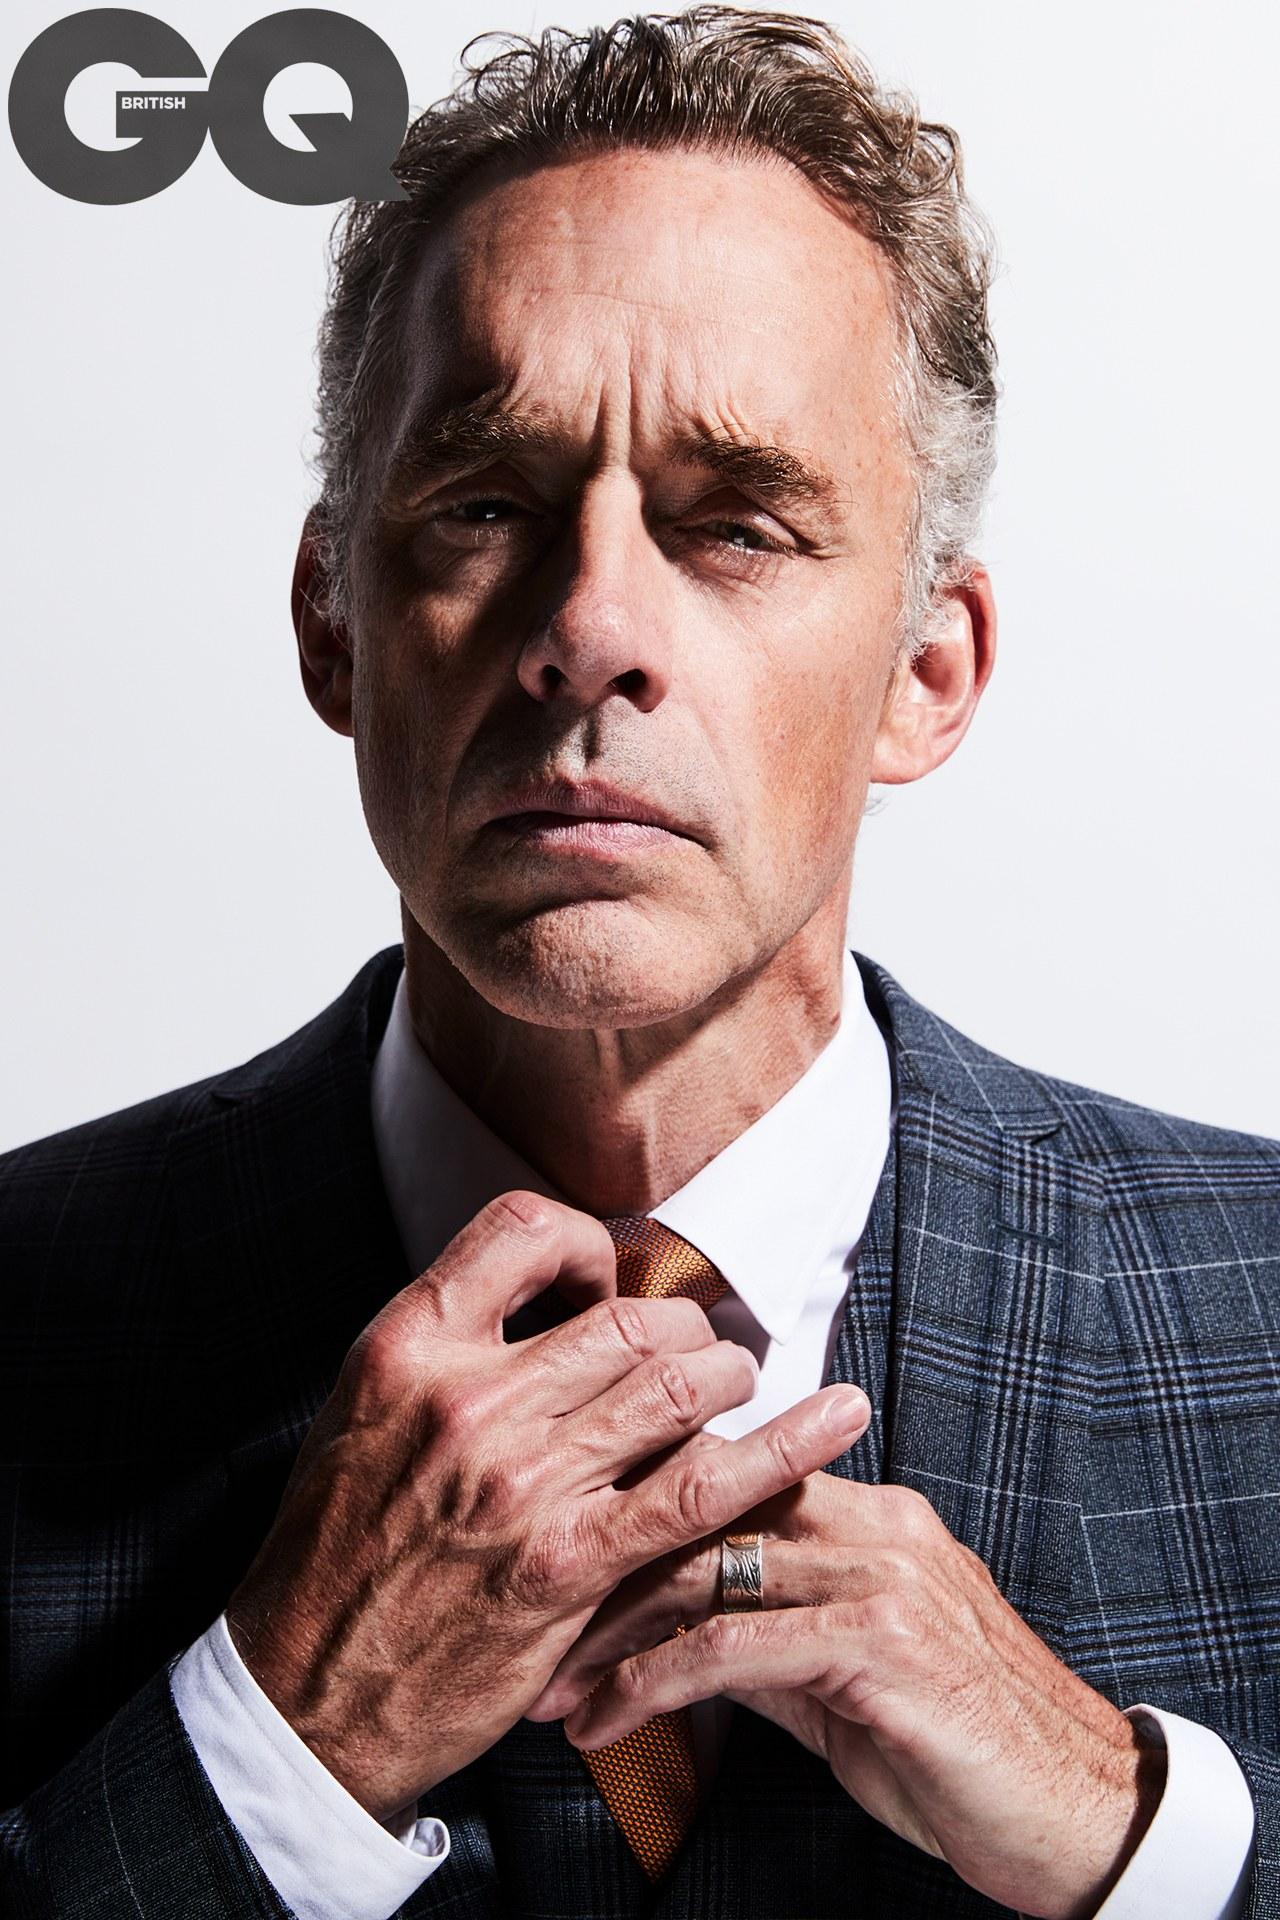 Jordan Peterson interview 2018: 'There was plenty of motivation to